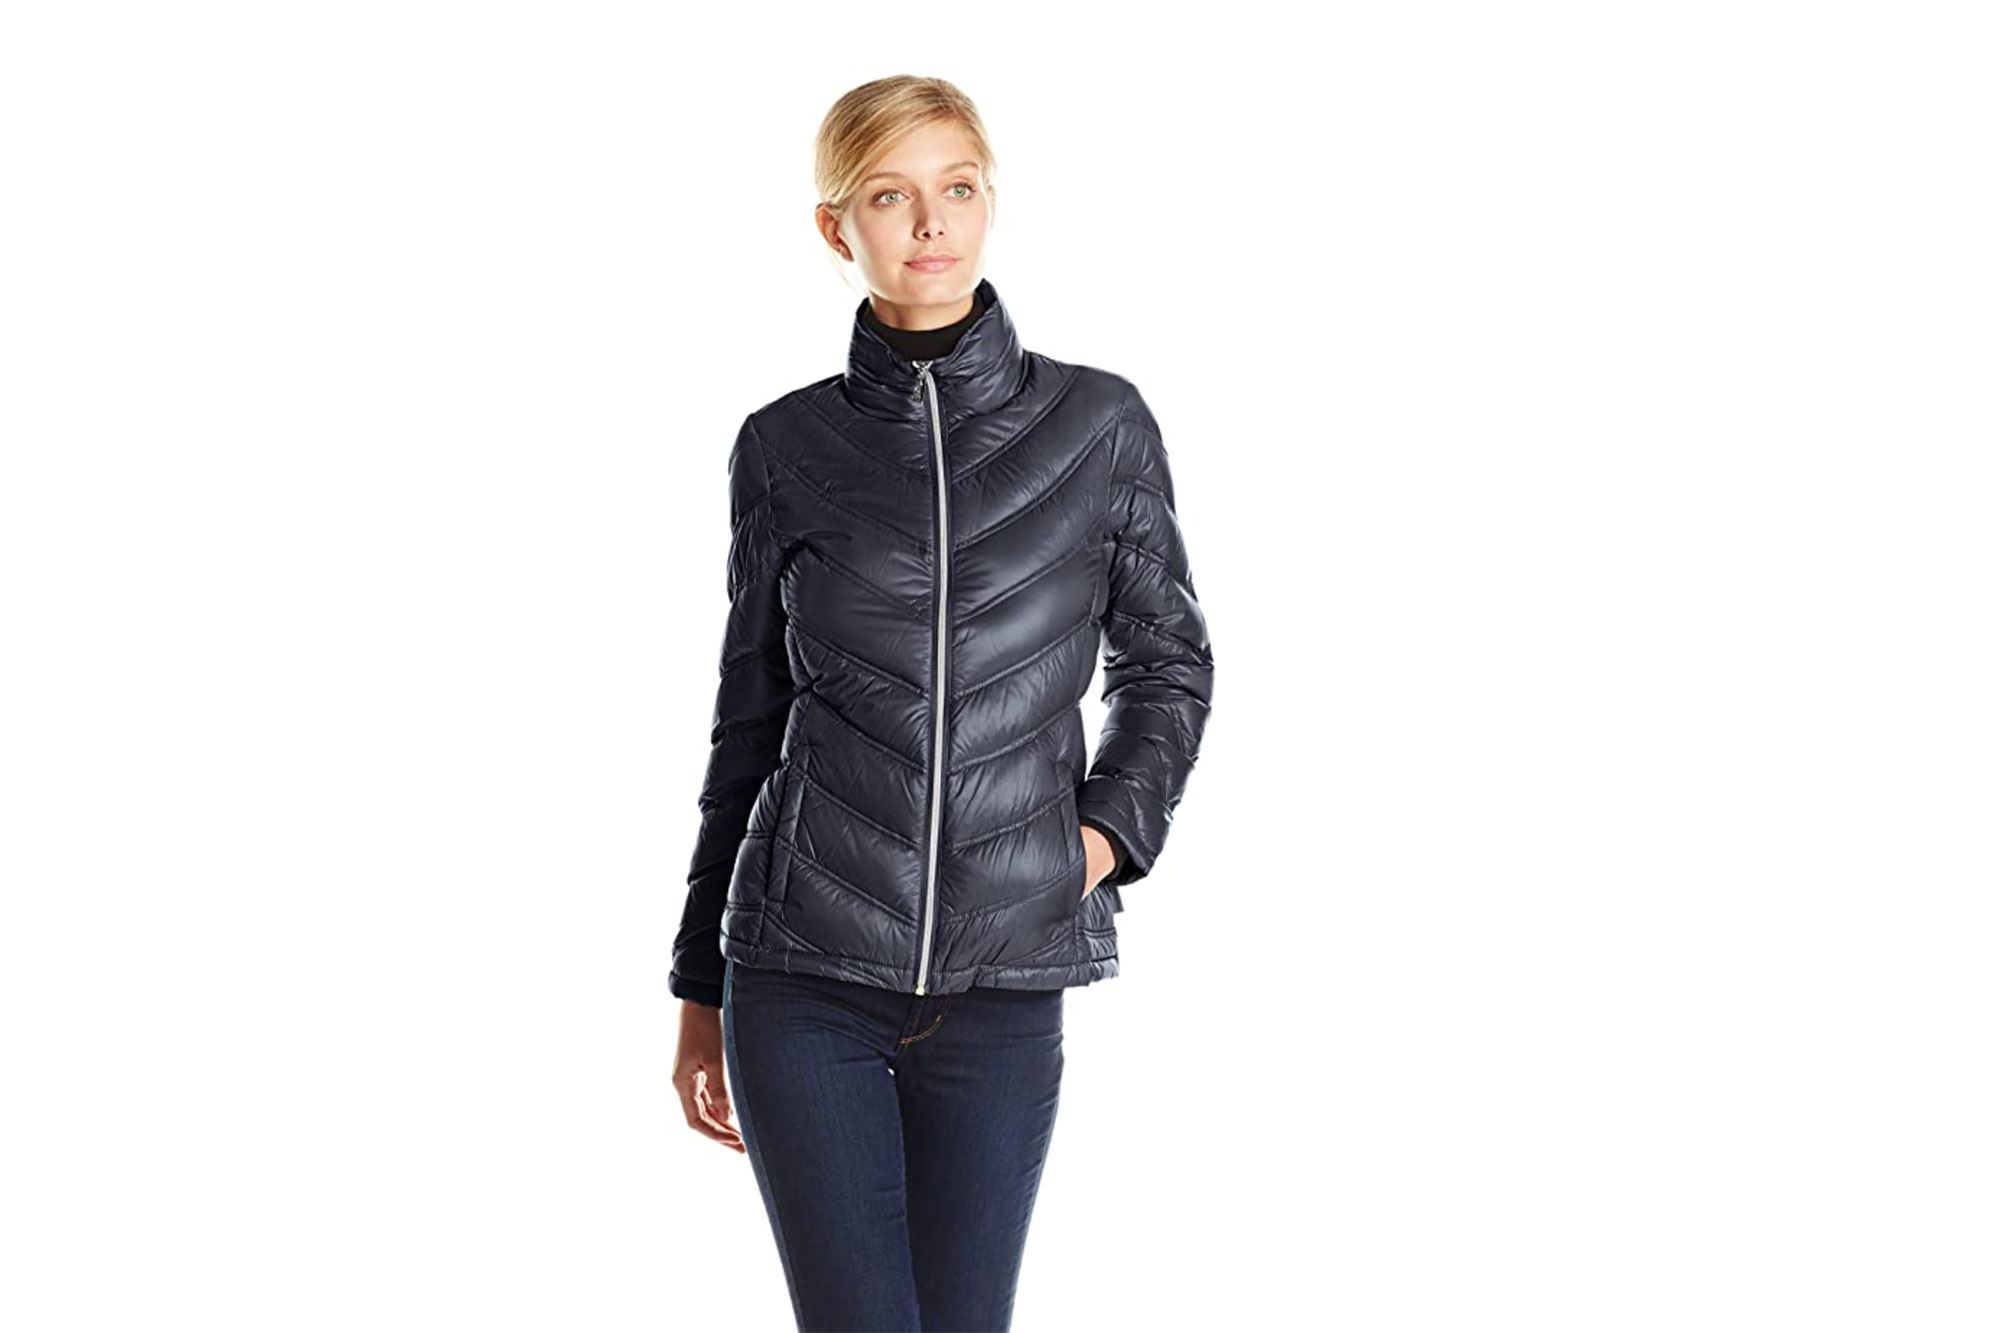 This Calvin Klein Quilted Down Jacket Is Up to 31% Off at Amazon